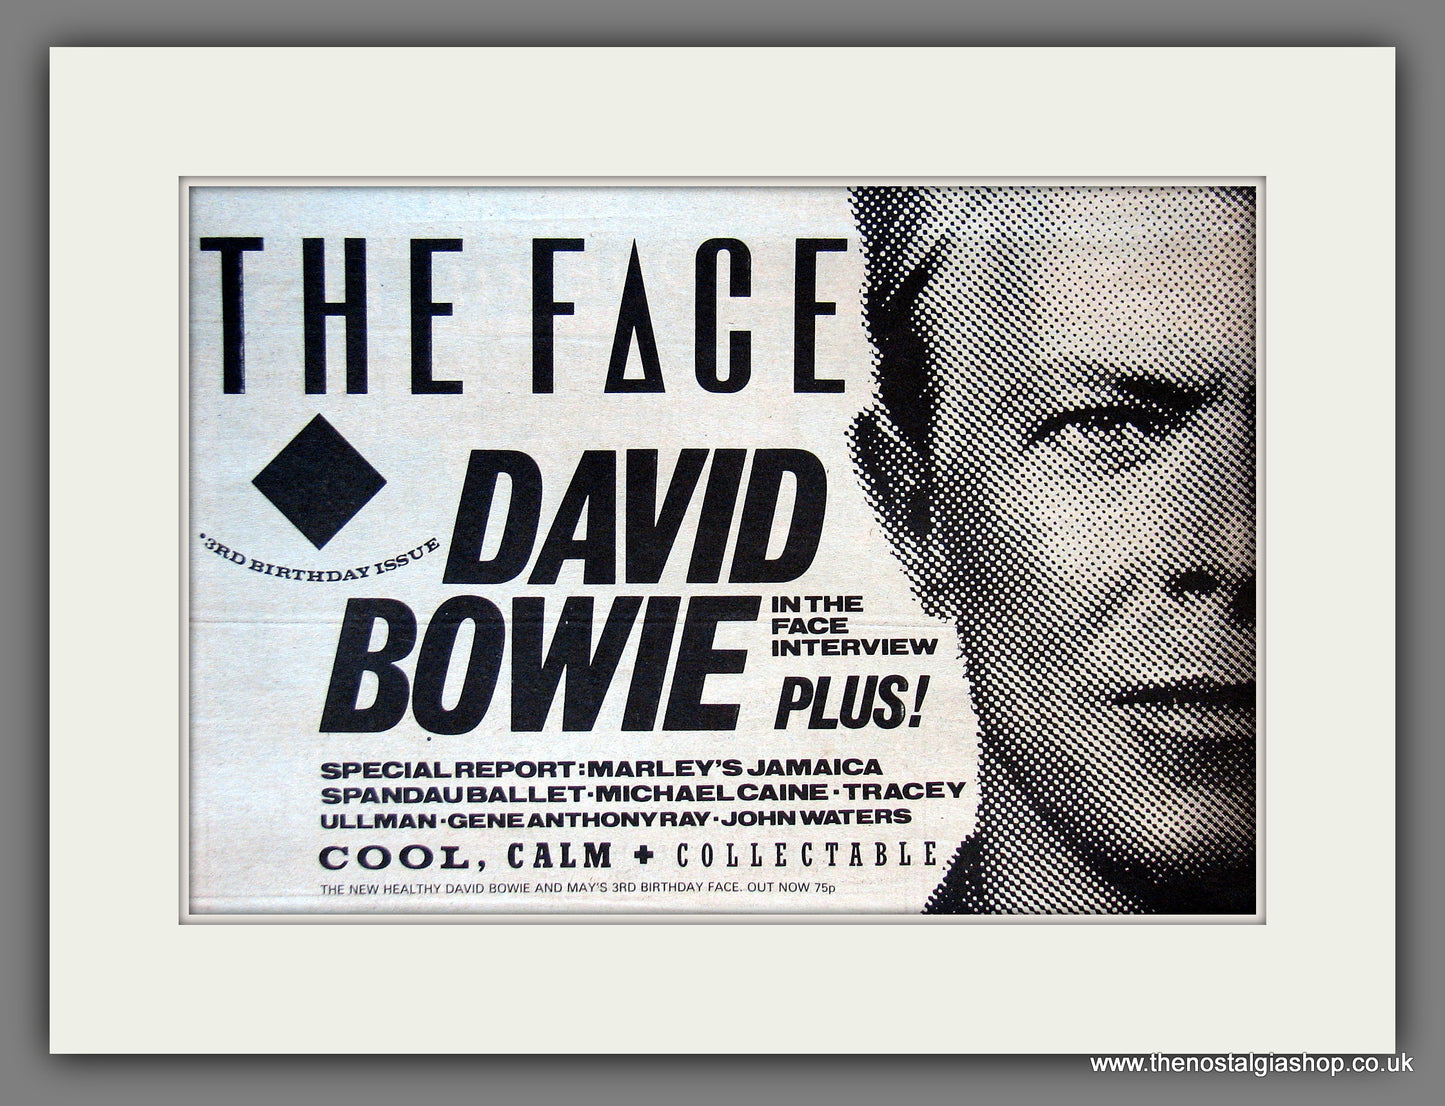 David Bowie. In The Face. Vintage Advert 1983 (ref AD55667)